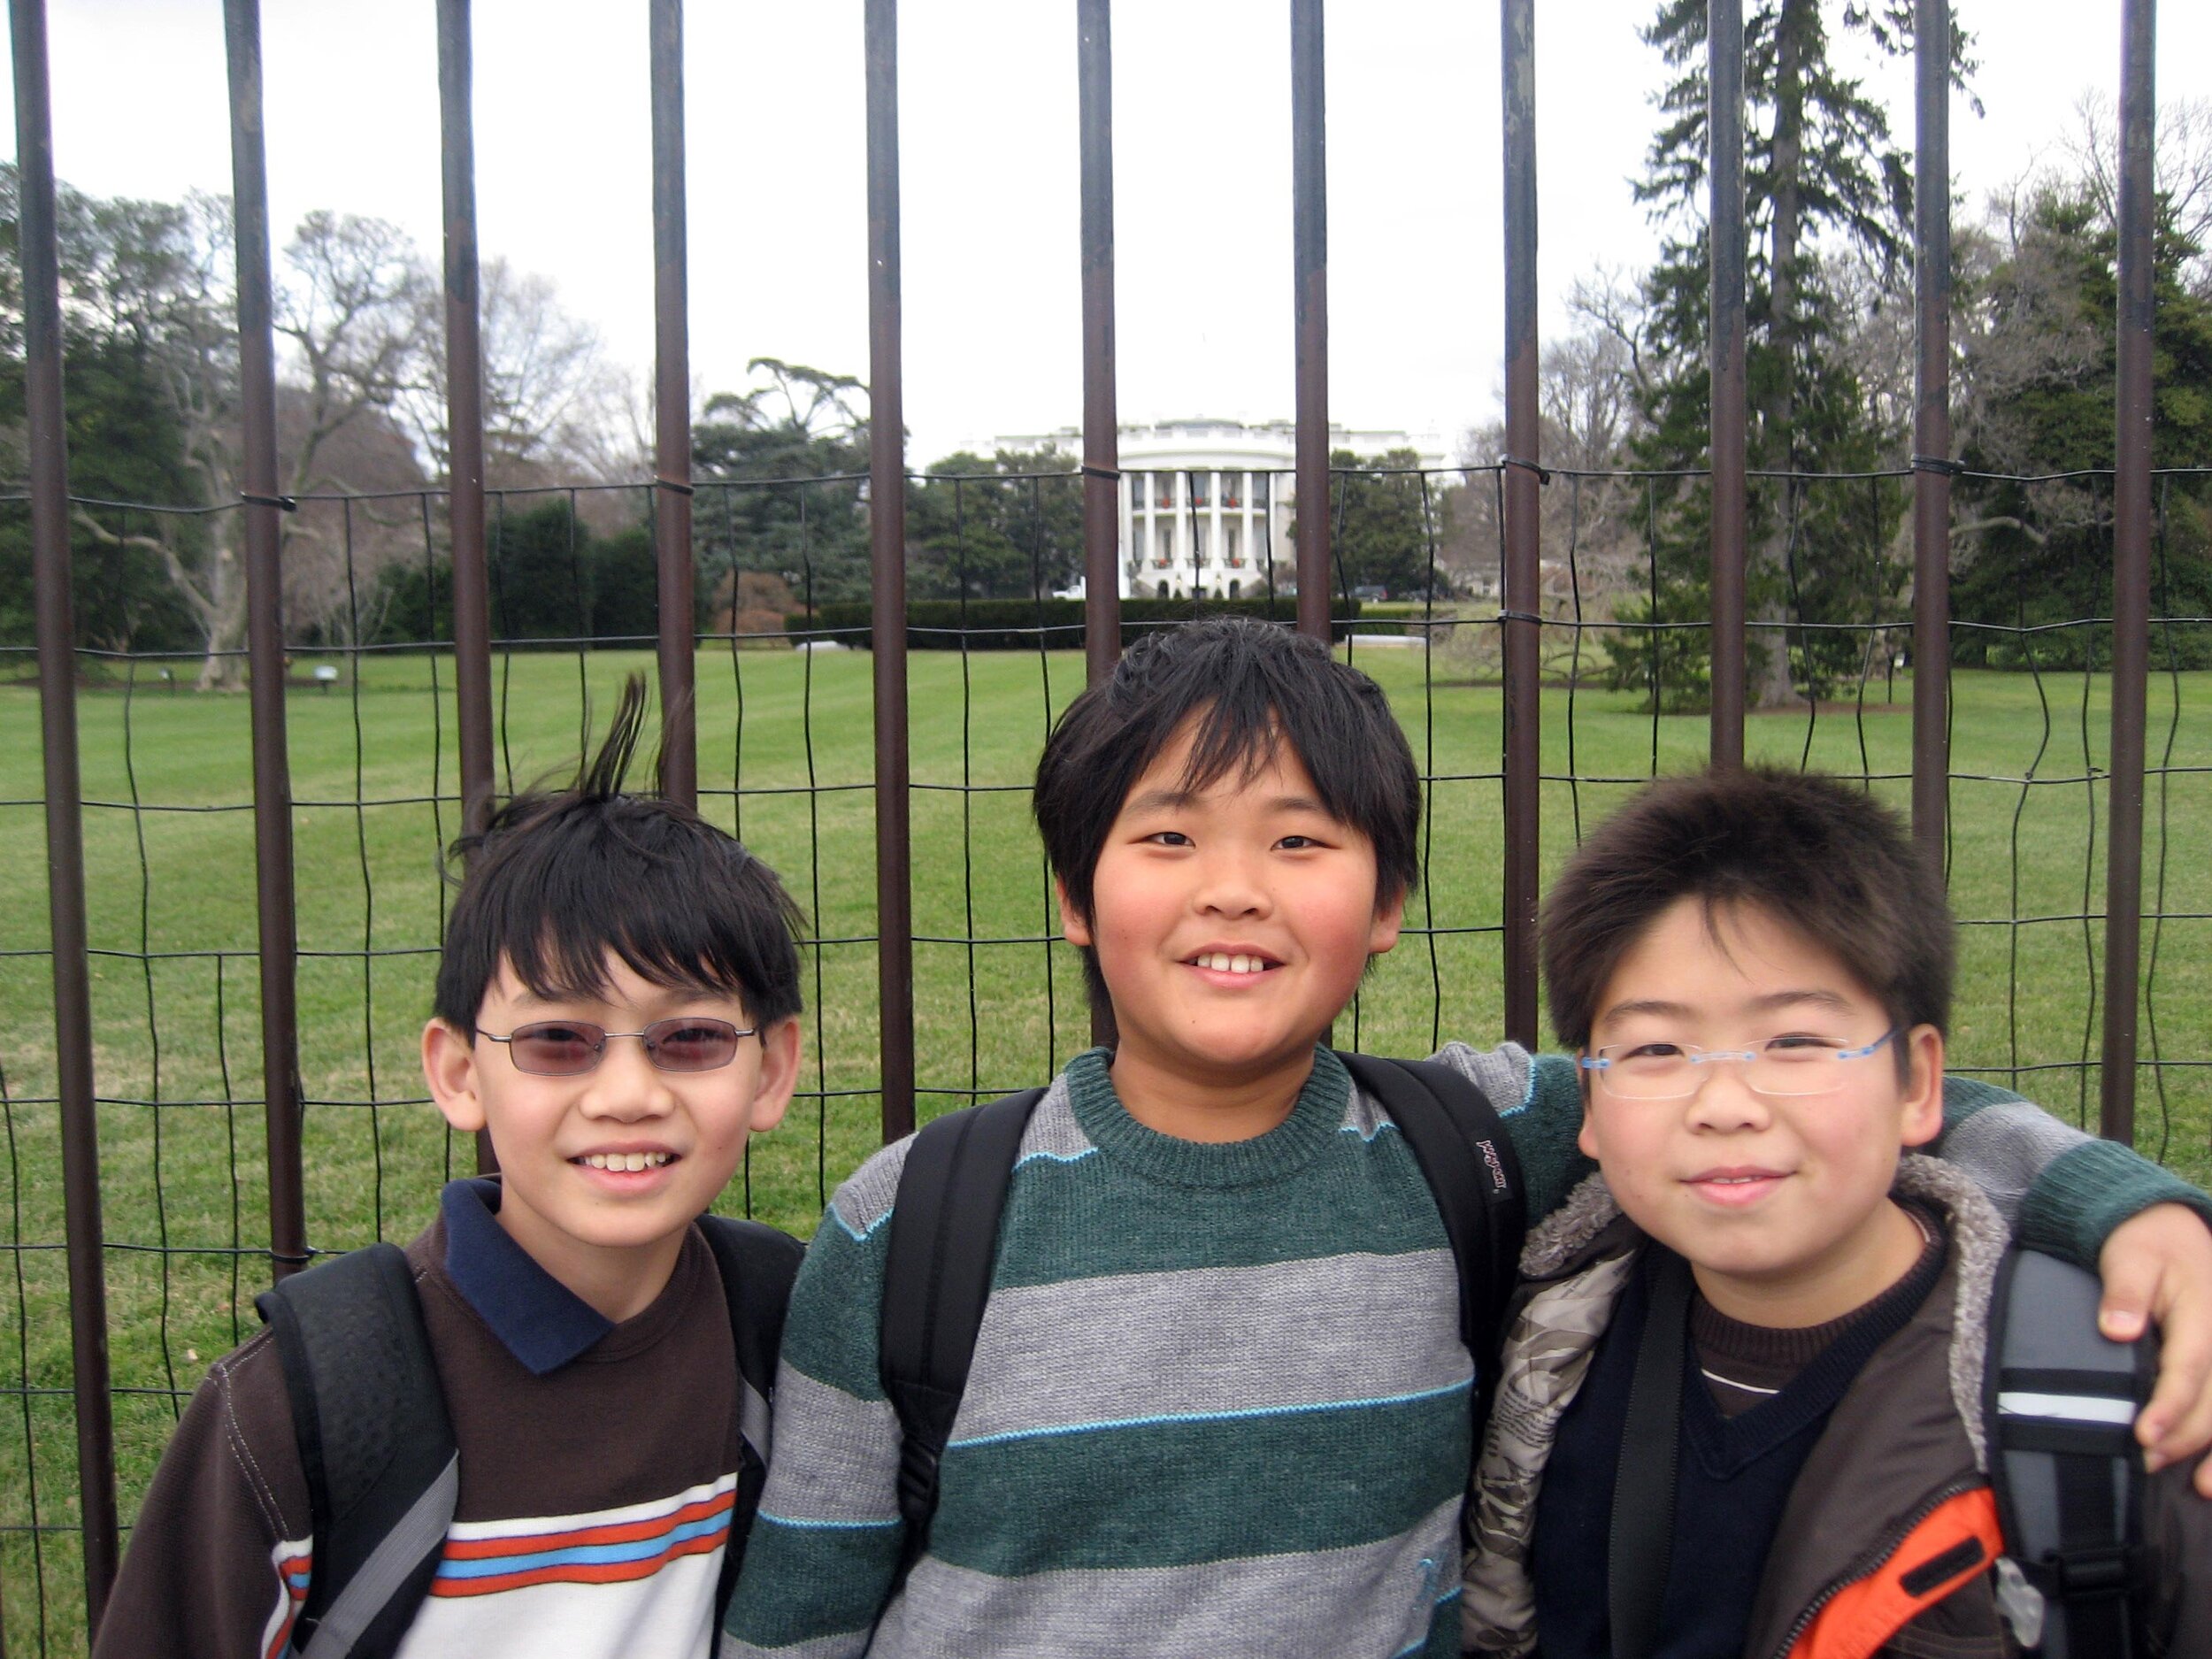  One of these boys might follow Obama! 